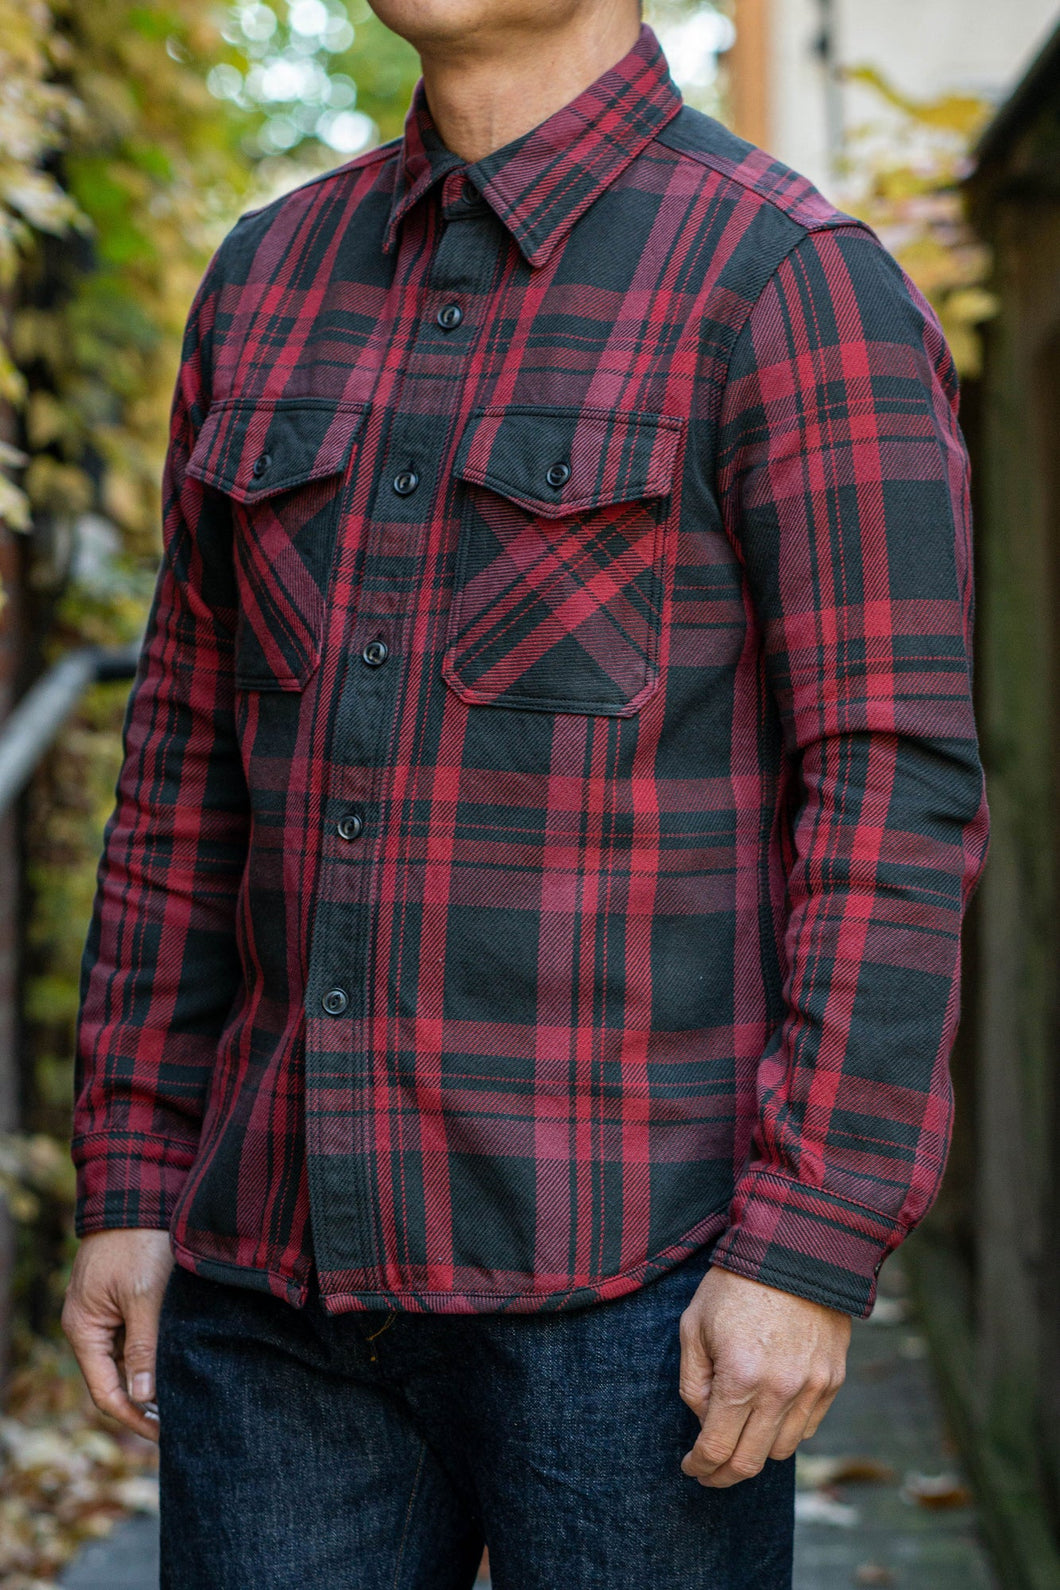 UES EXTRA HEAVY FLANNEL SHIRT - RED